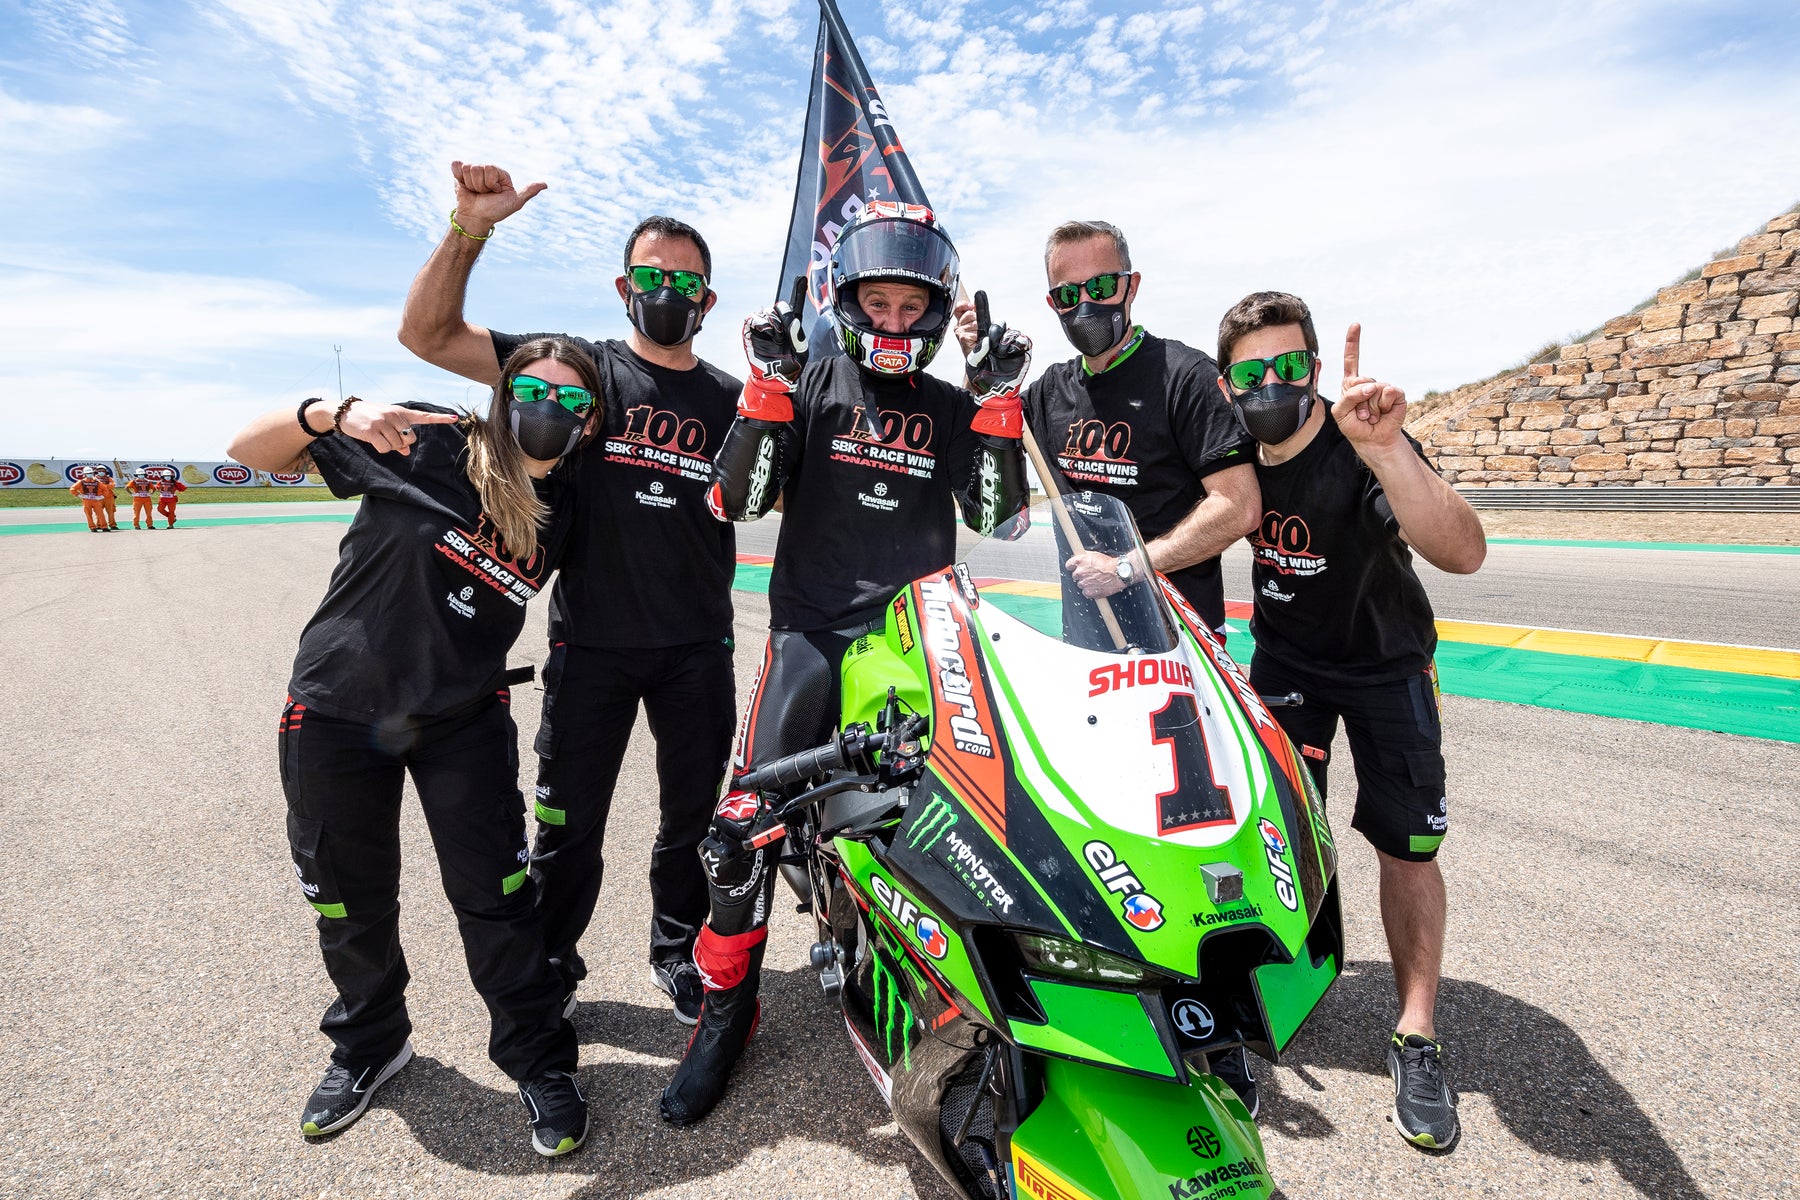 RECORD-BREAKING JONATHAN REA DOMINATES WSBK RACE ONE IN ARAGON, SPAIN, AND TAKES 100TH SERIES WIN